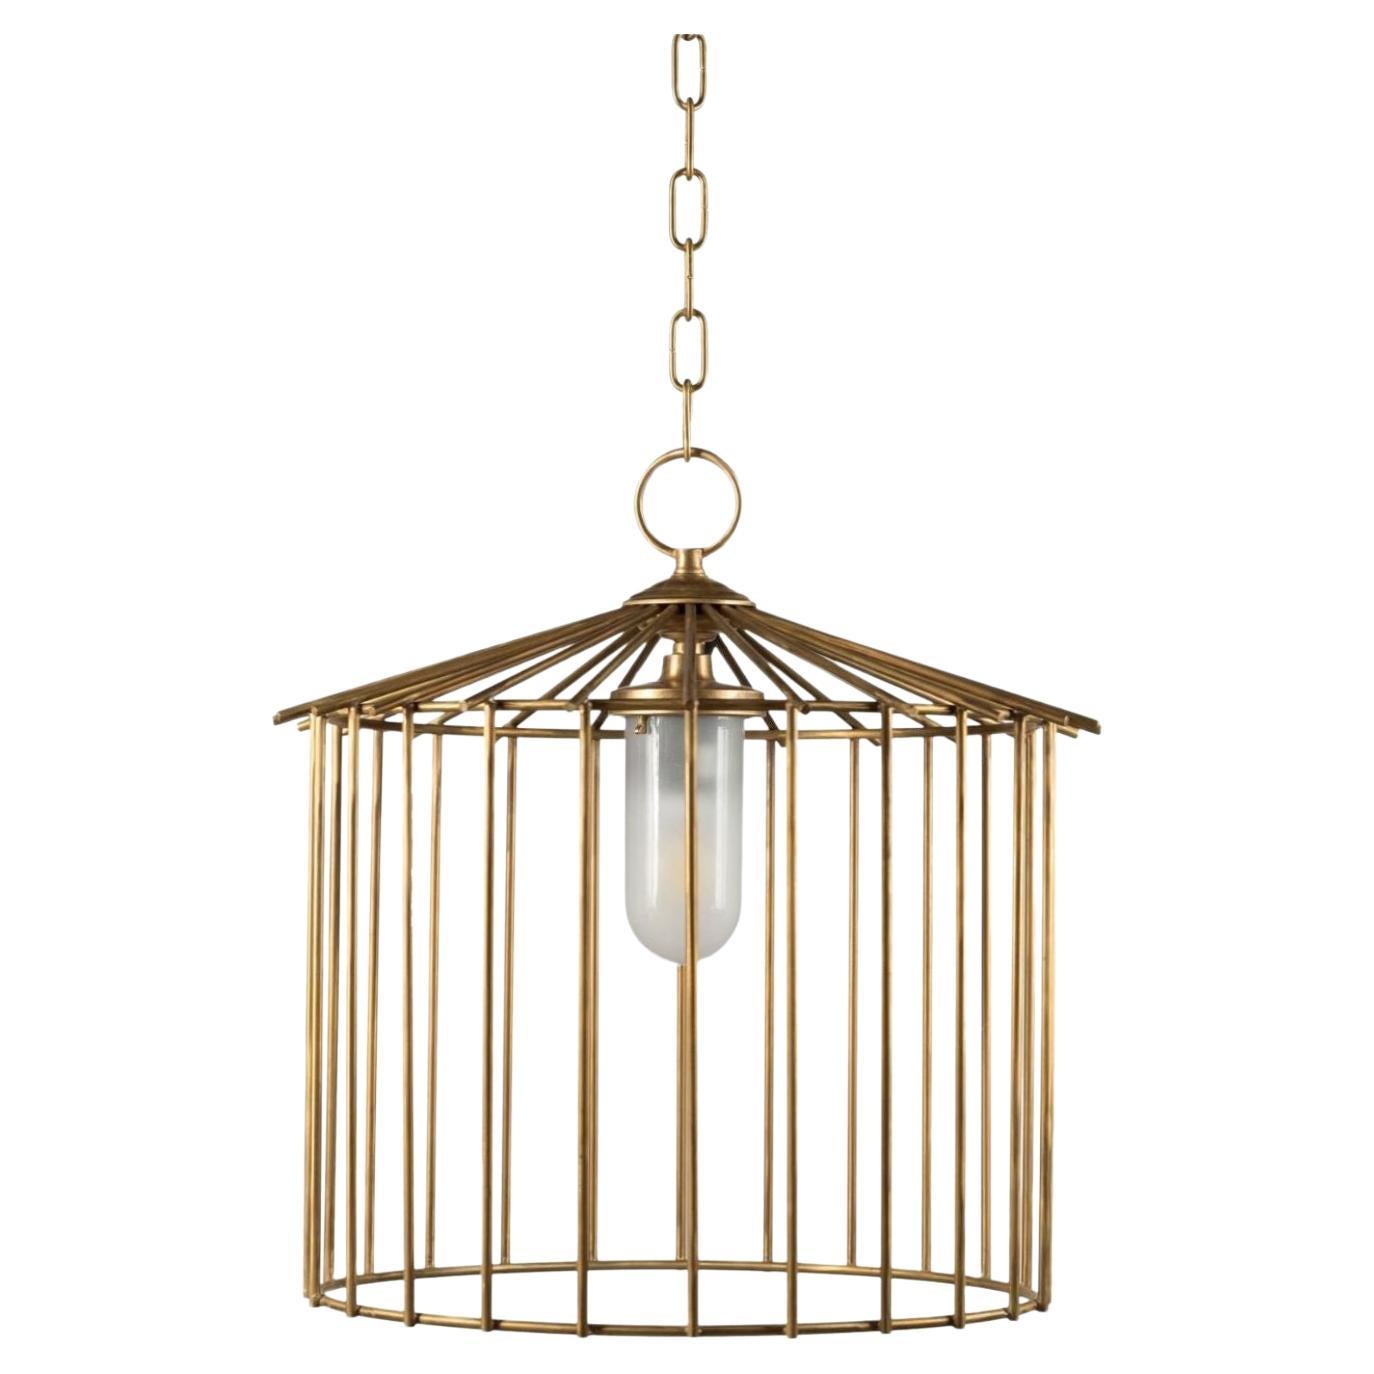 Cage Chandelier for Outdoor For Sale